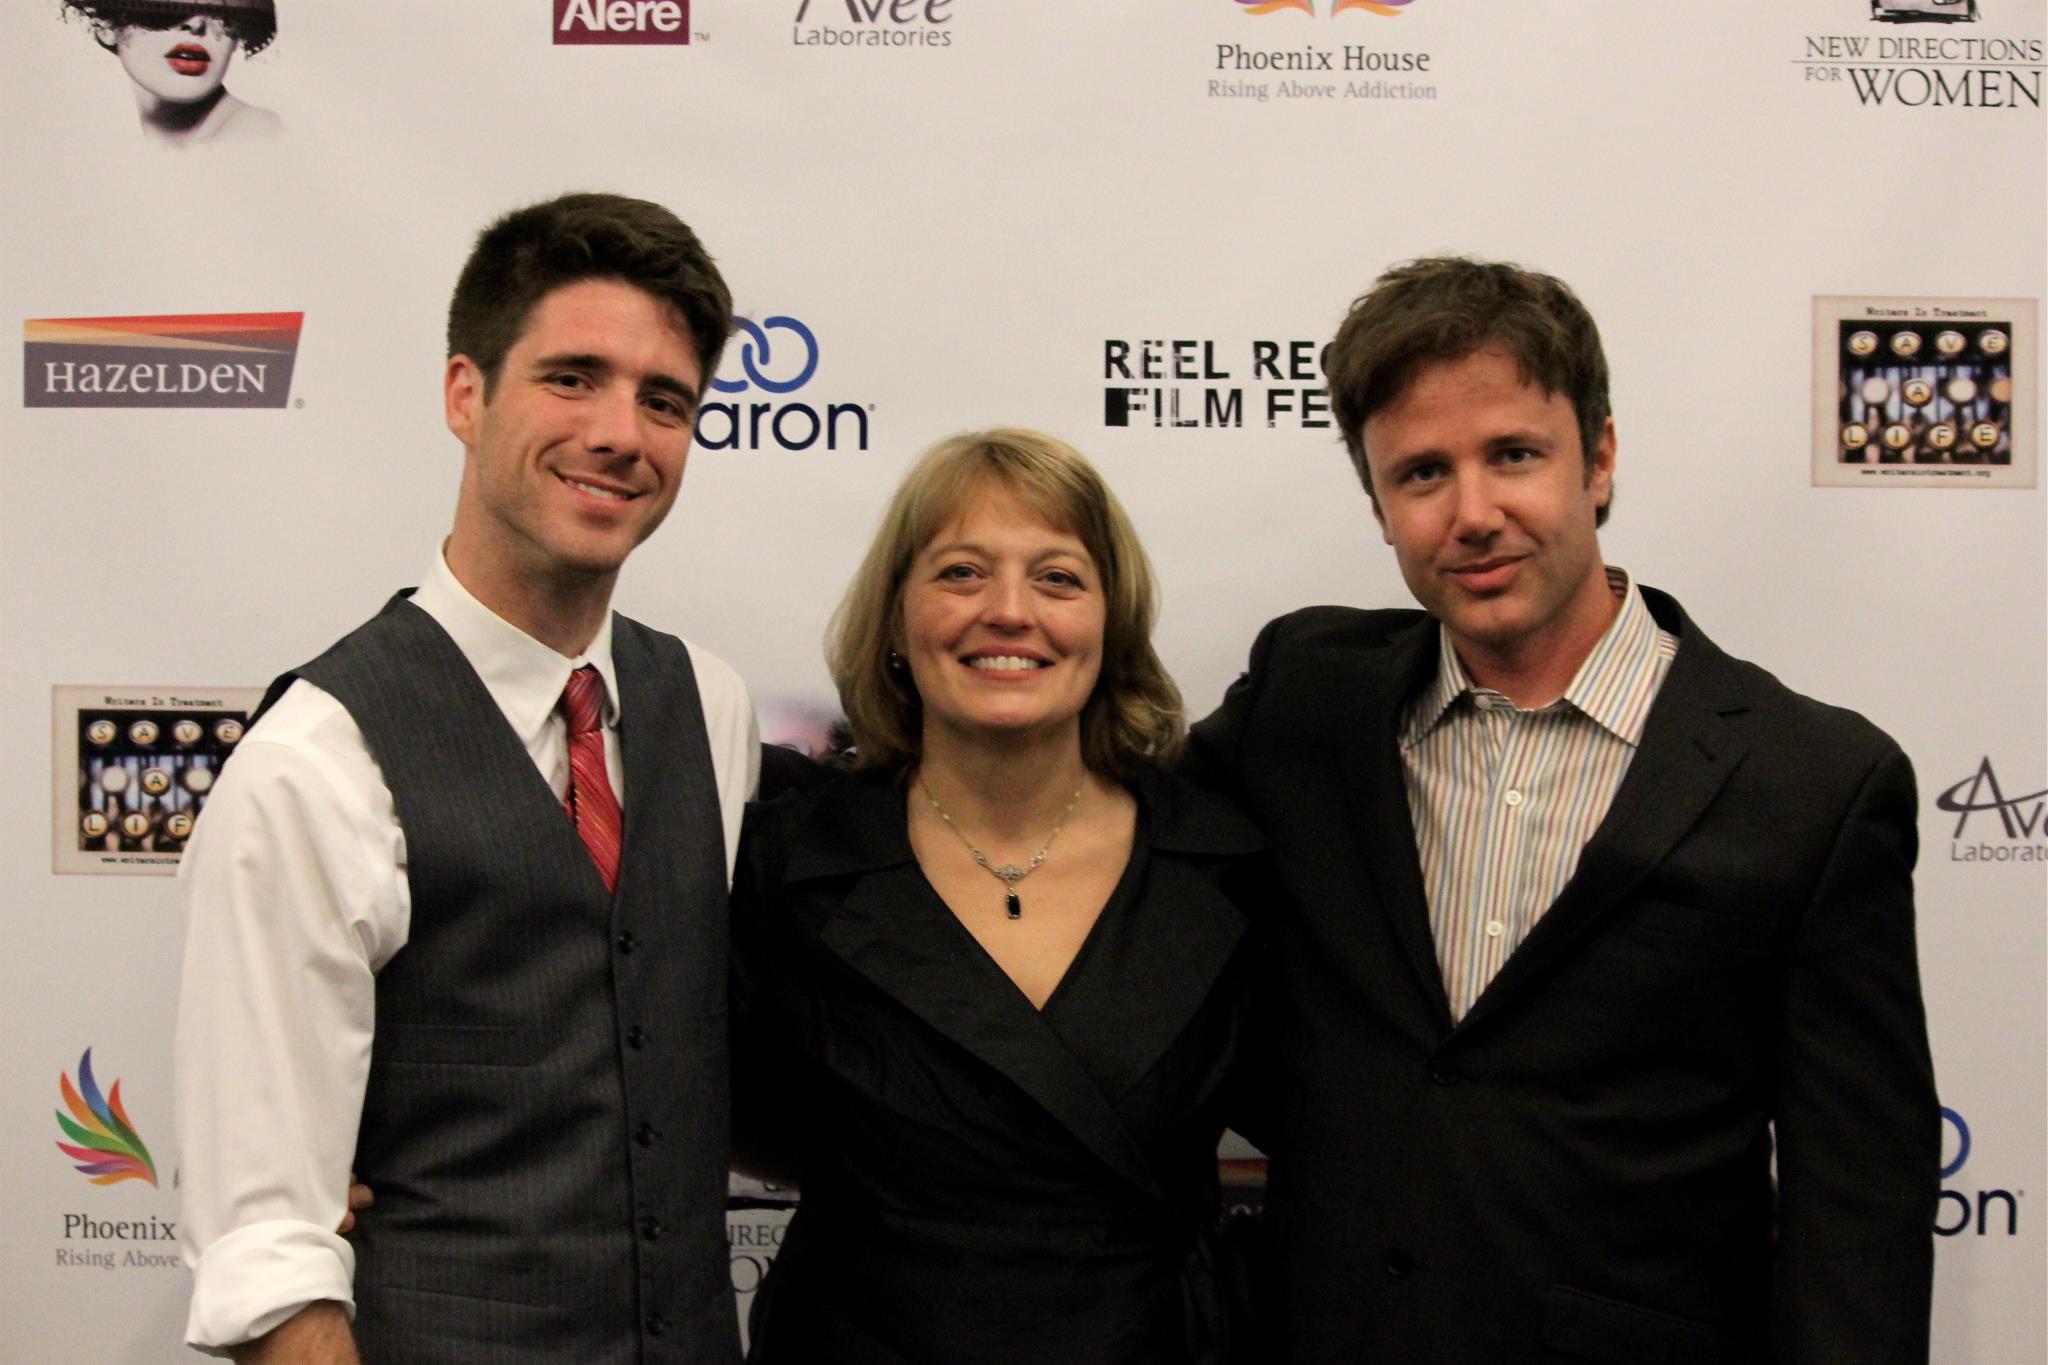 My Name Was Bette: The Life and Death of an Alcoholic premiere at Quad Theatre in NYC